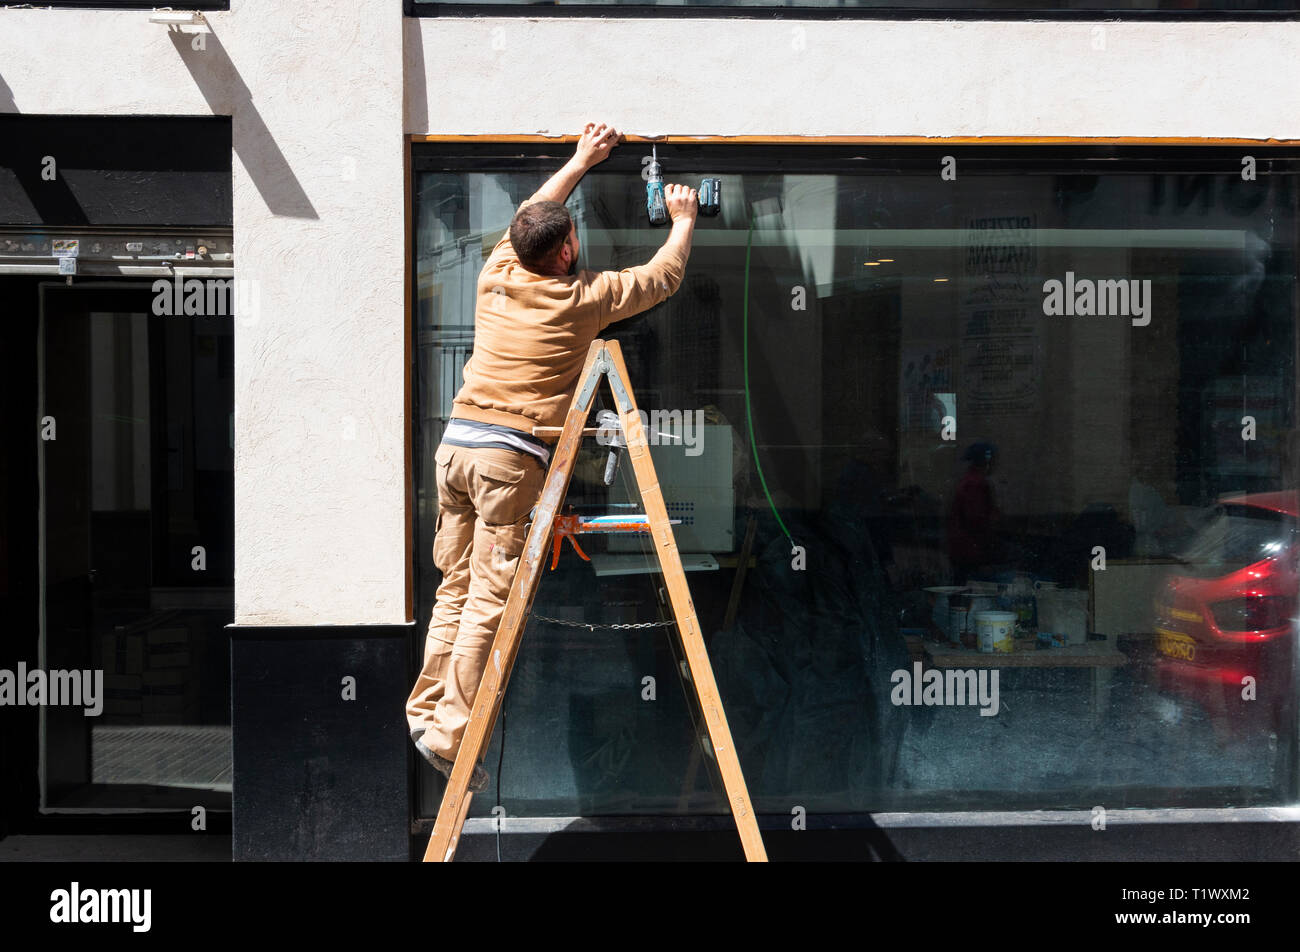 Workman on a ladder making a repair with a cordless power drill in Seville, Spain Stock Photo